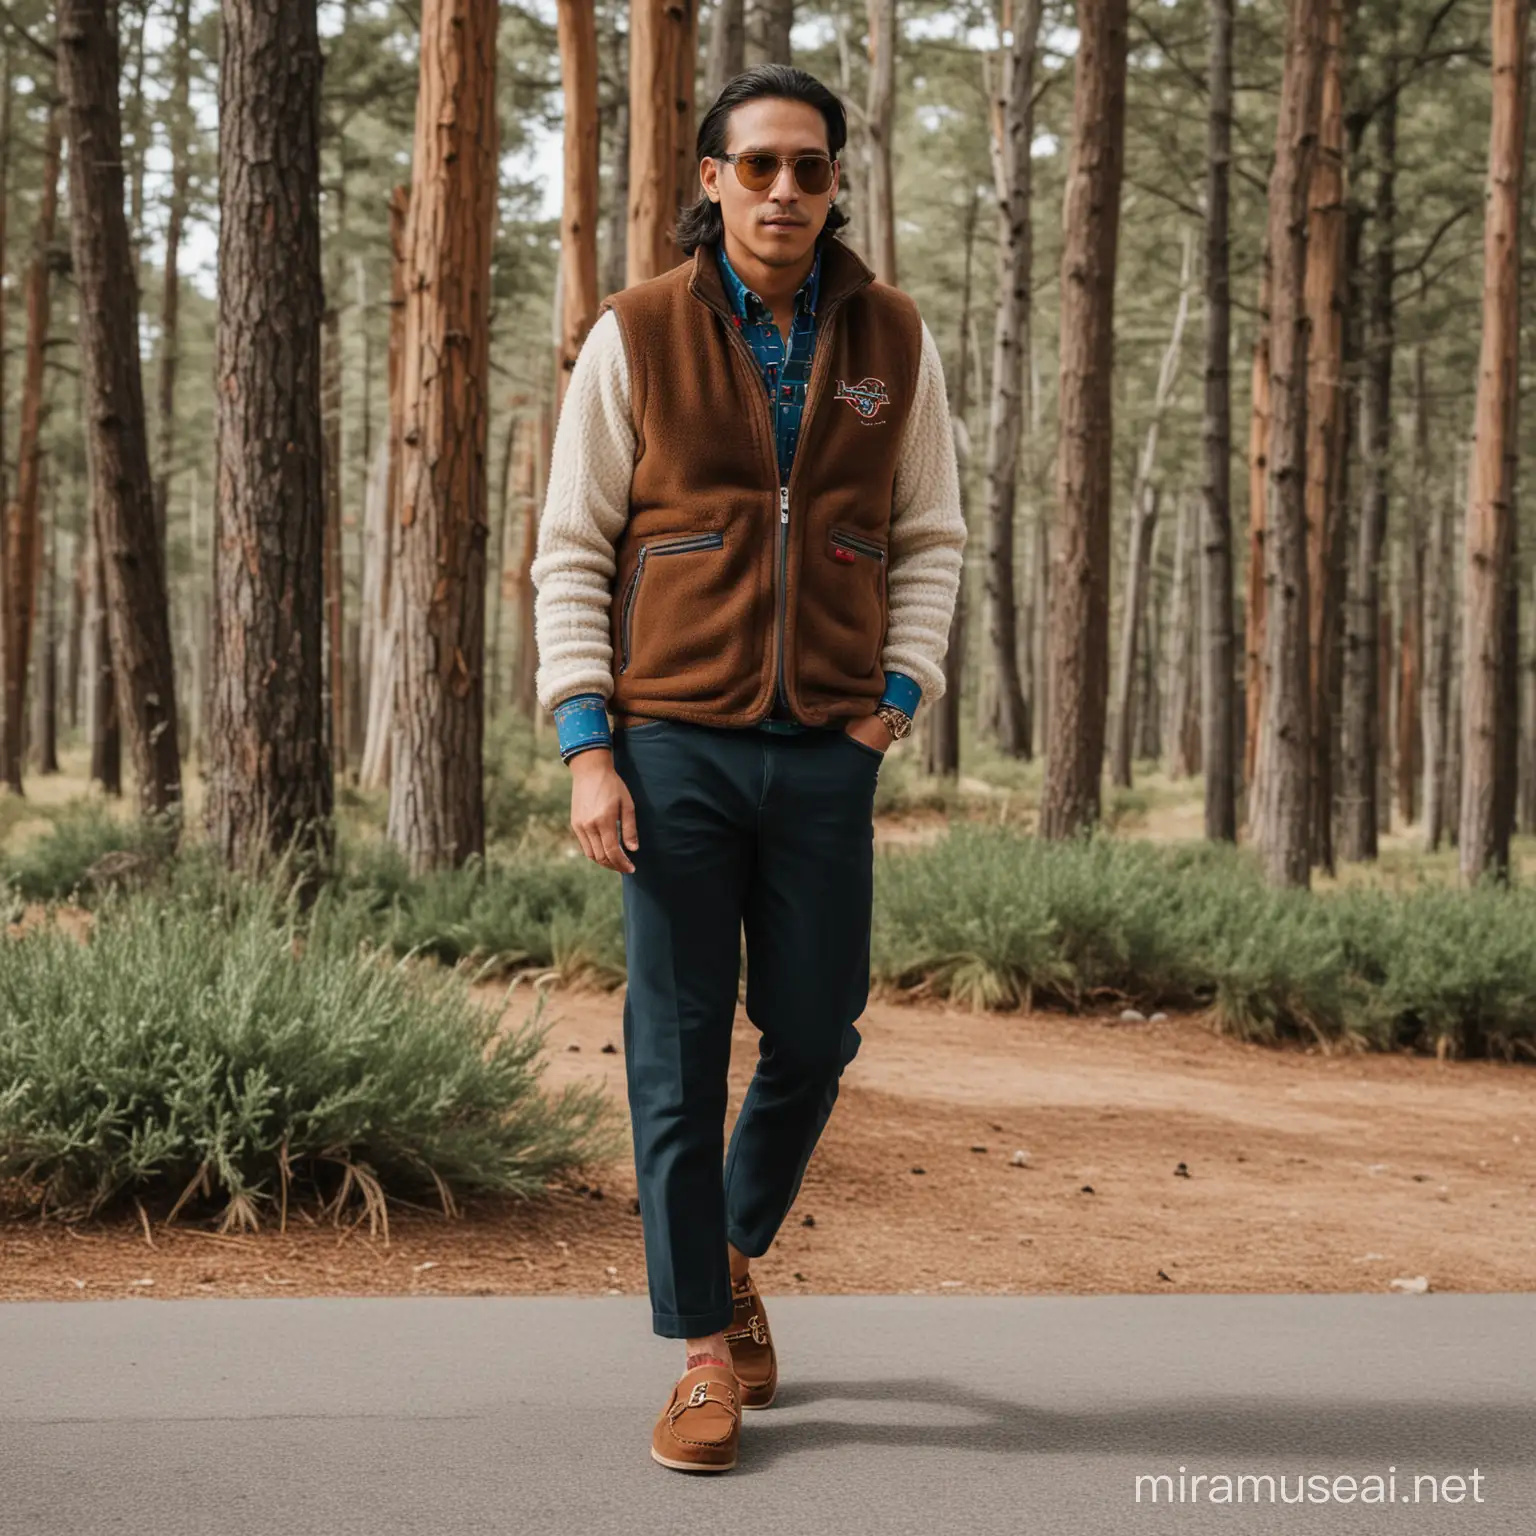 A native American professional wearing a Patagonia fleece vest and Gucci loafers
